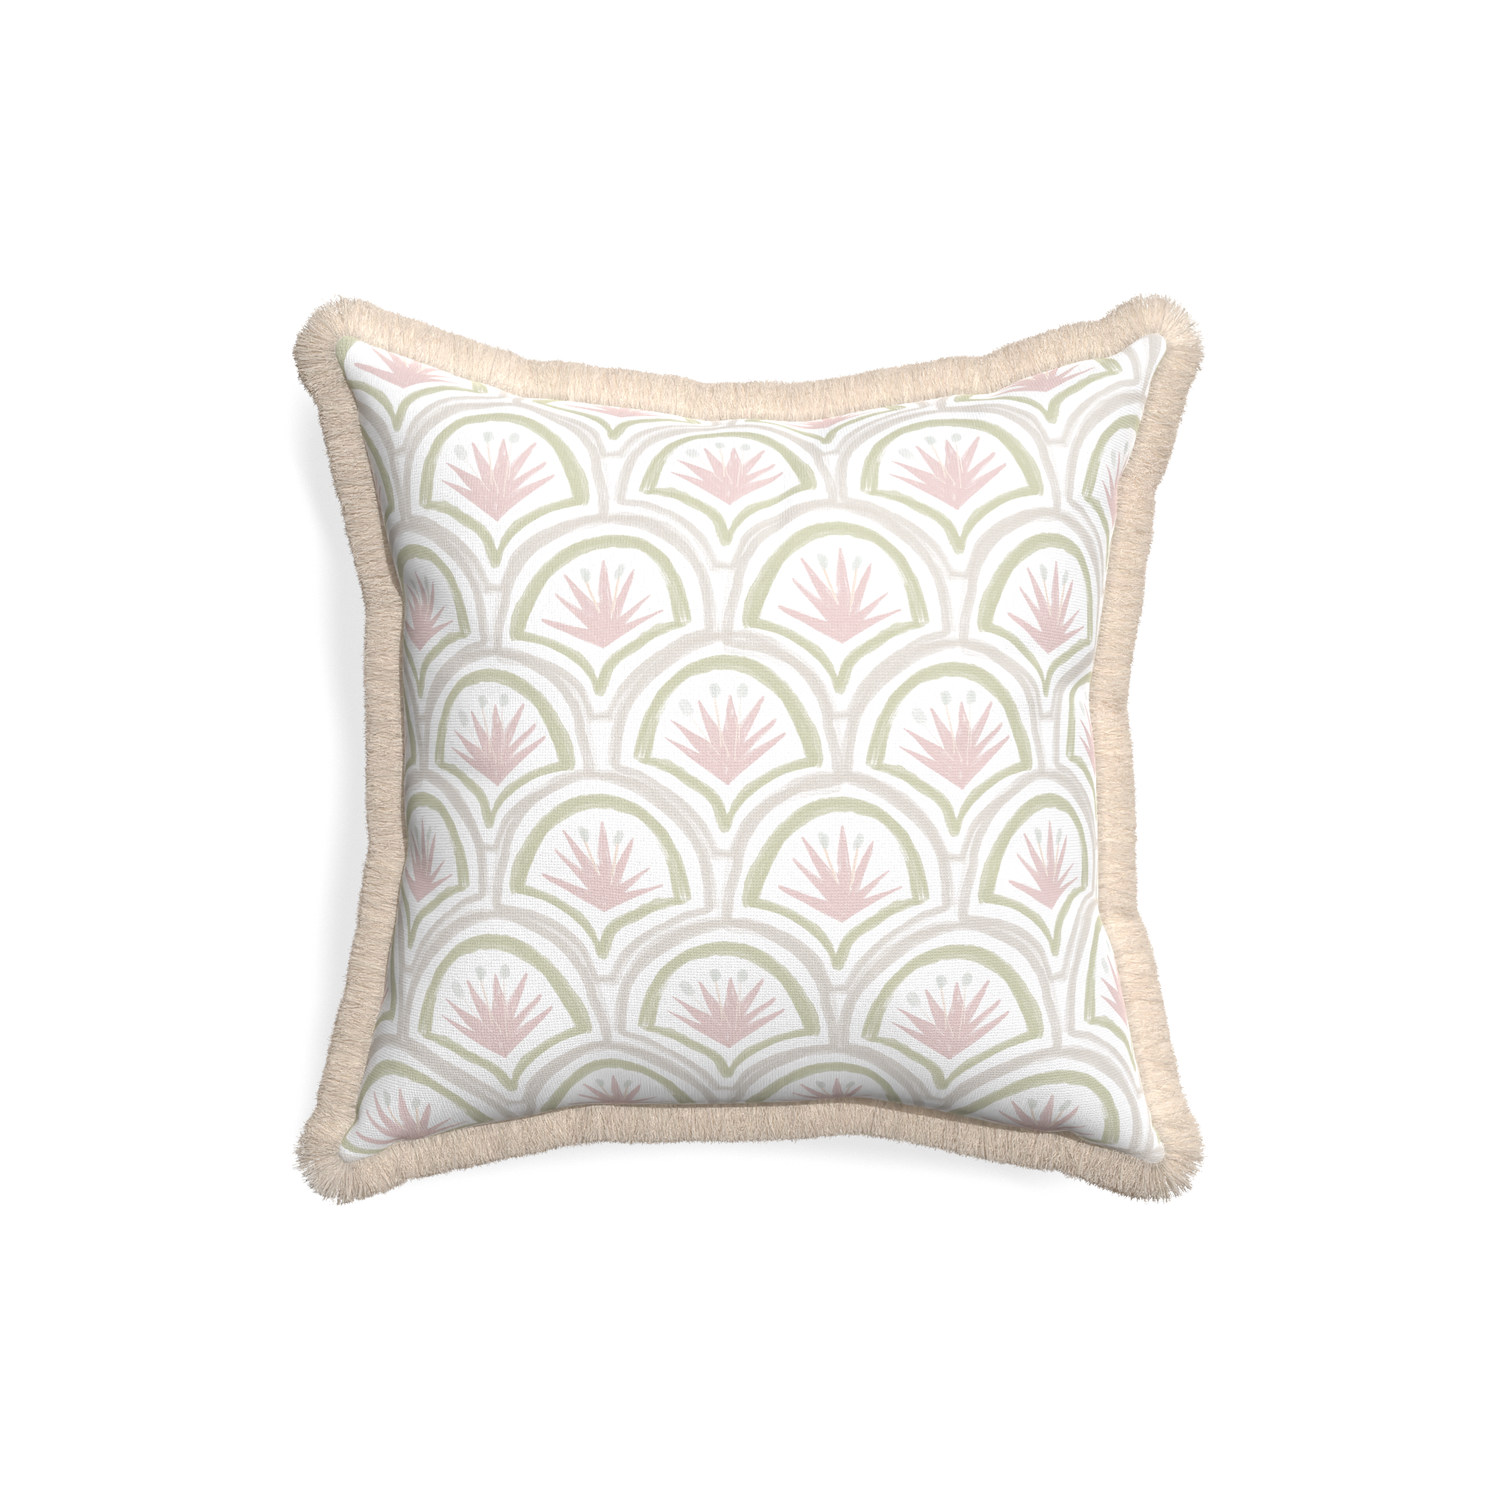 18-square thatcher rose custom pink & green palmpillow with cream fringe on white background